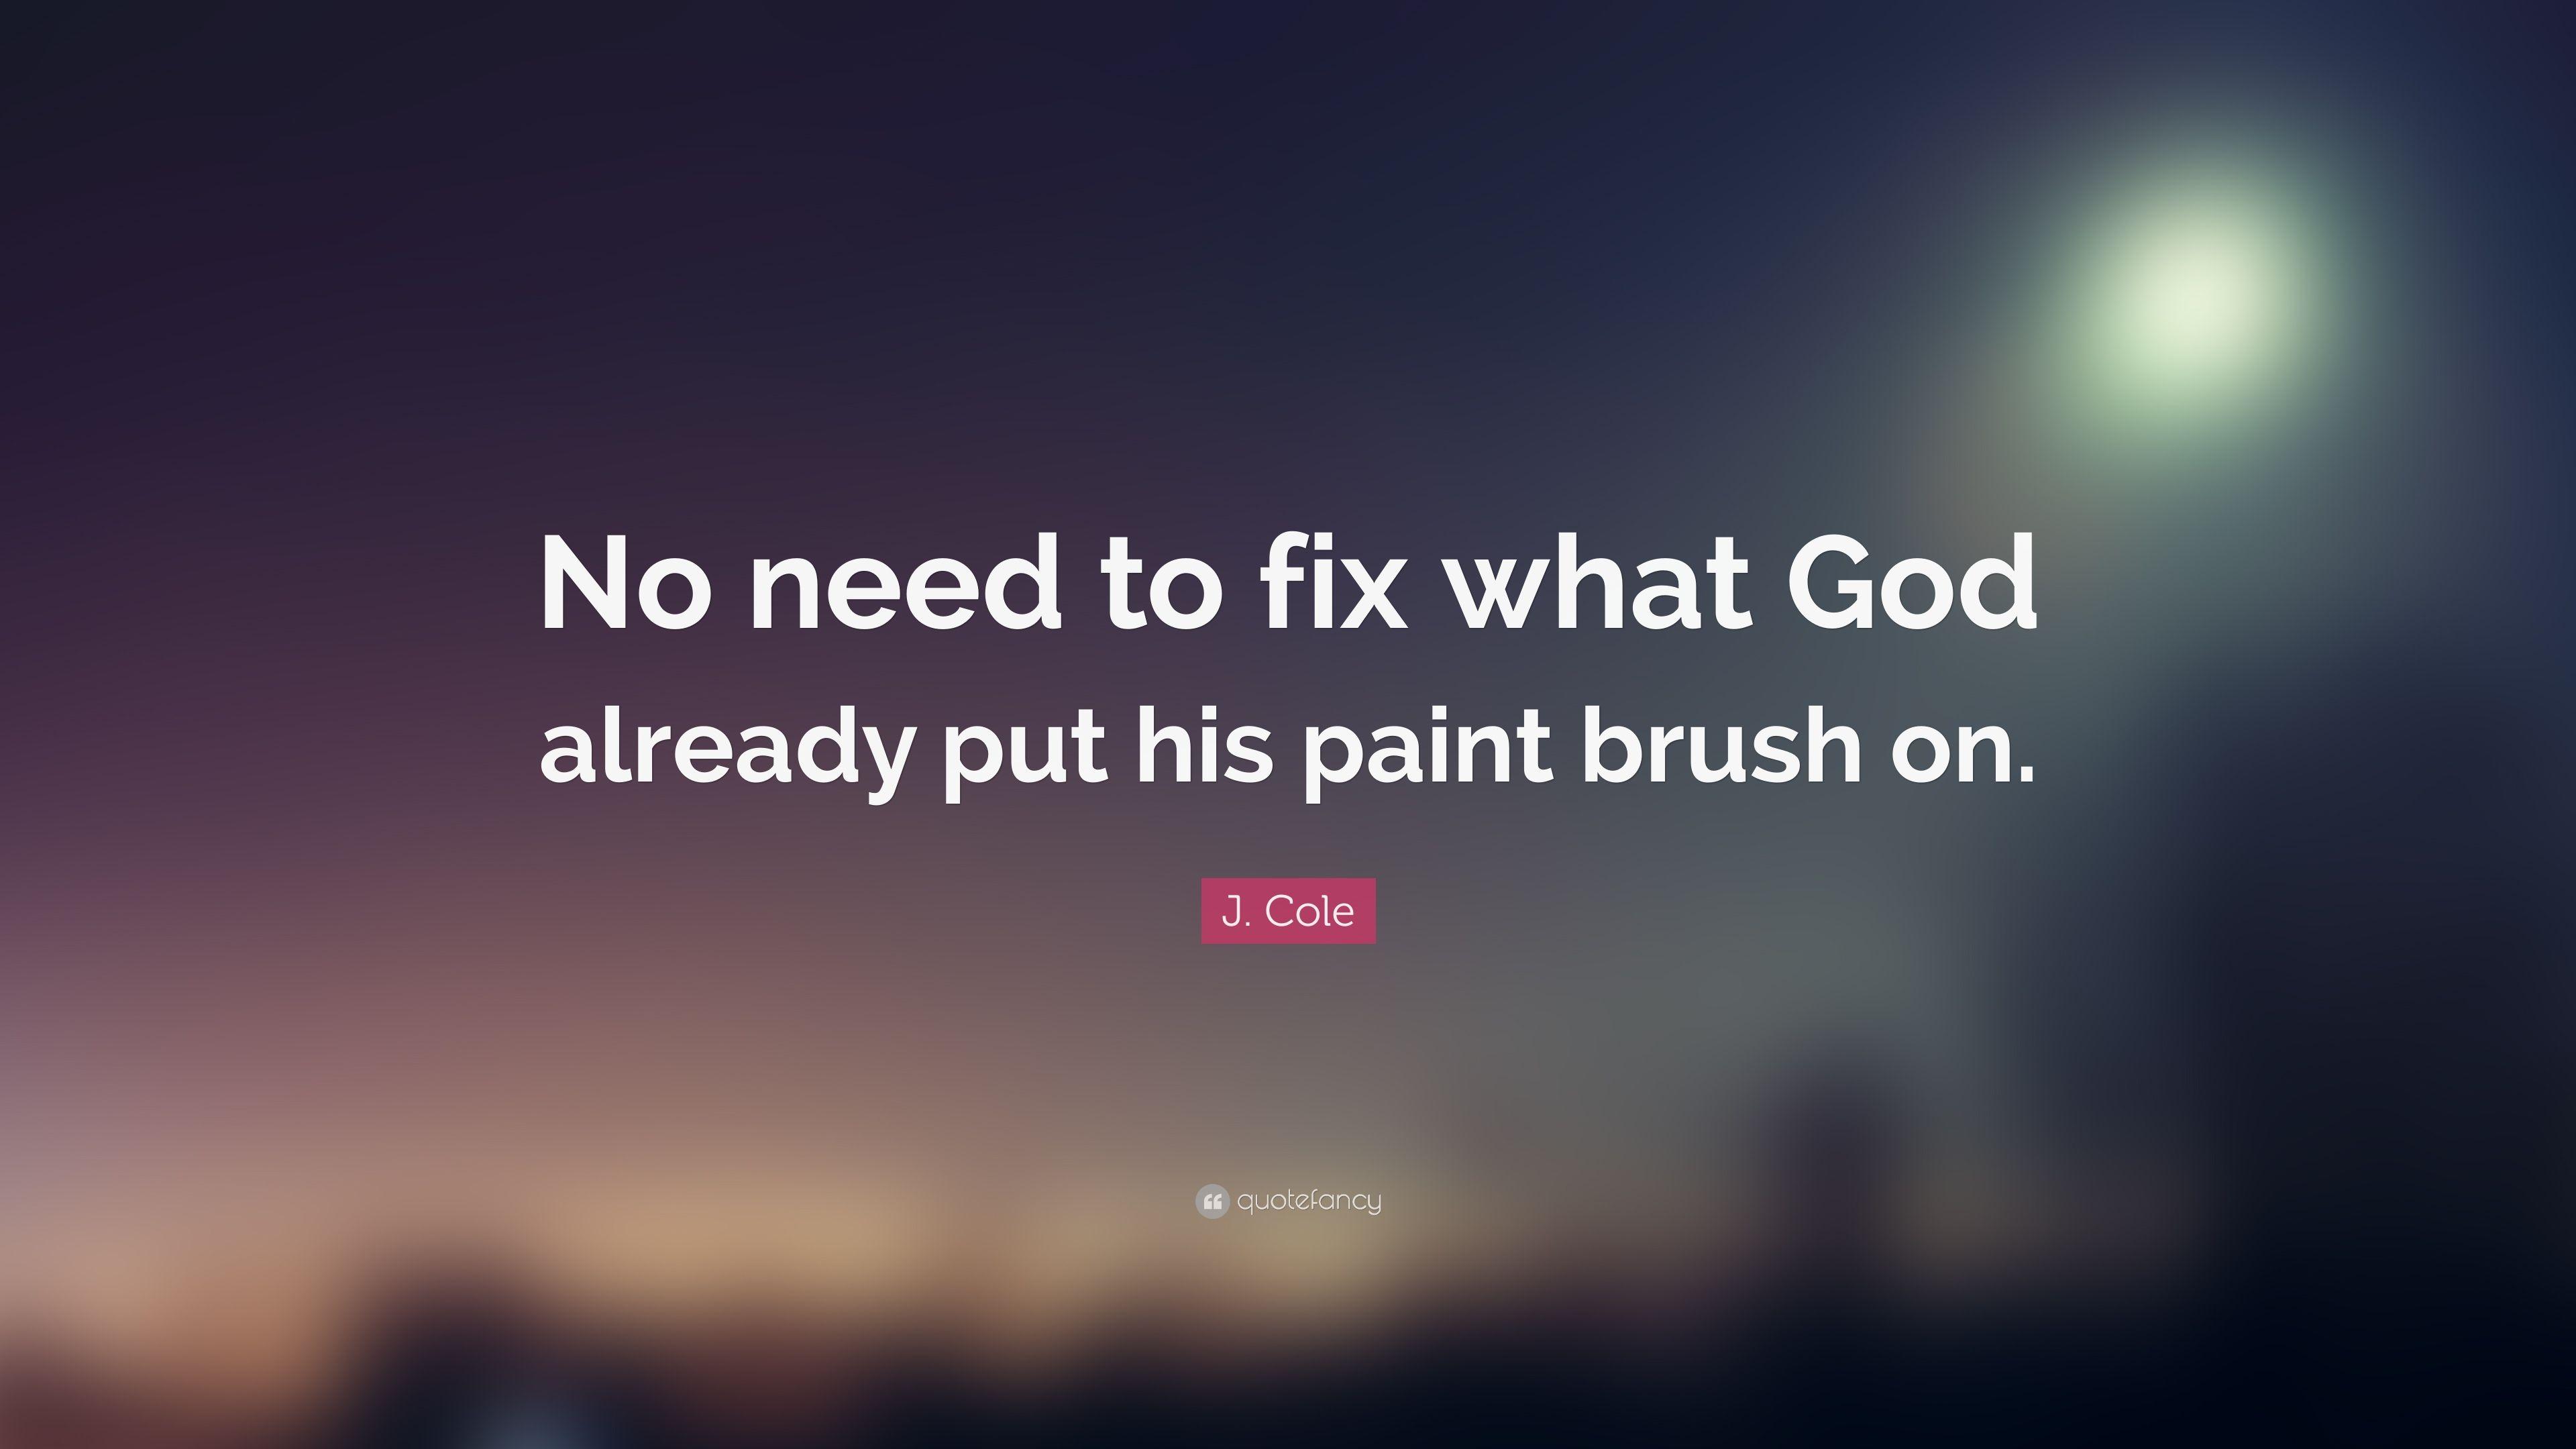 J. Cole Quote: “No need to fix what God already put his paint brush